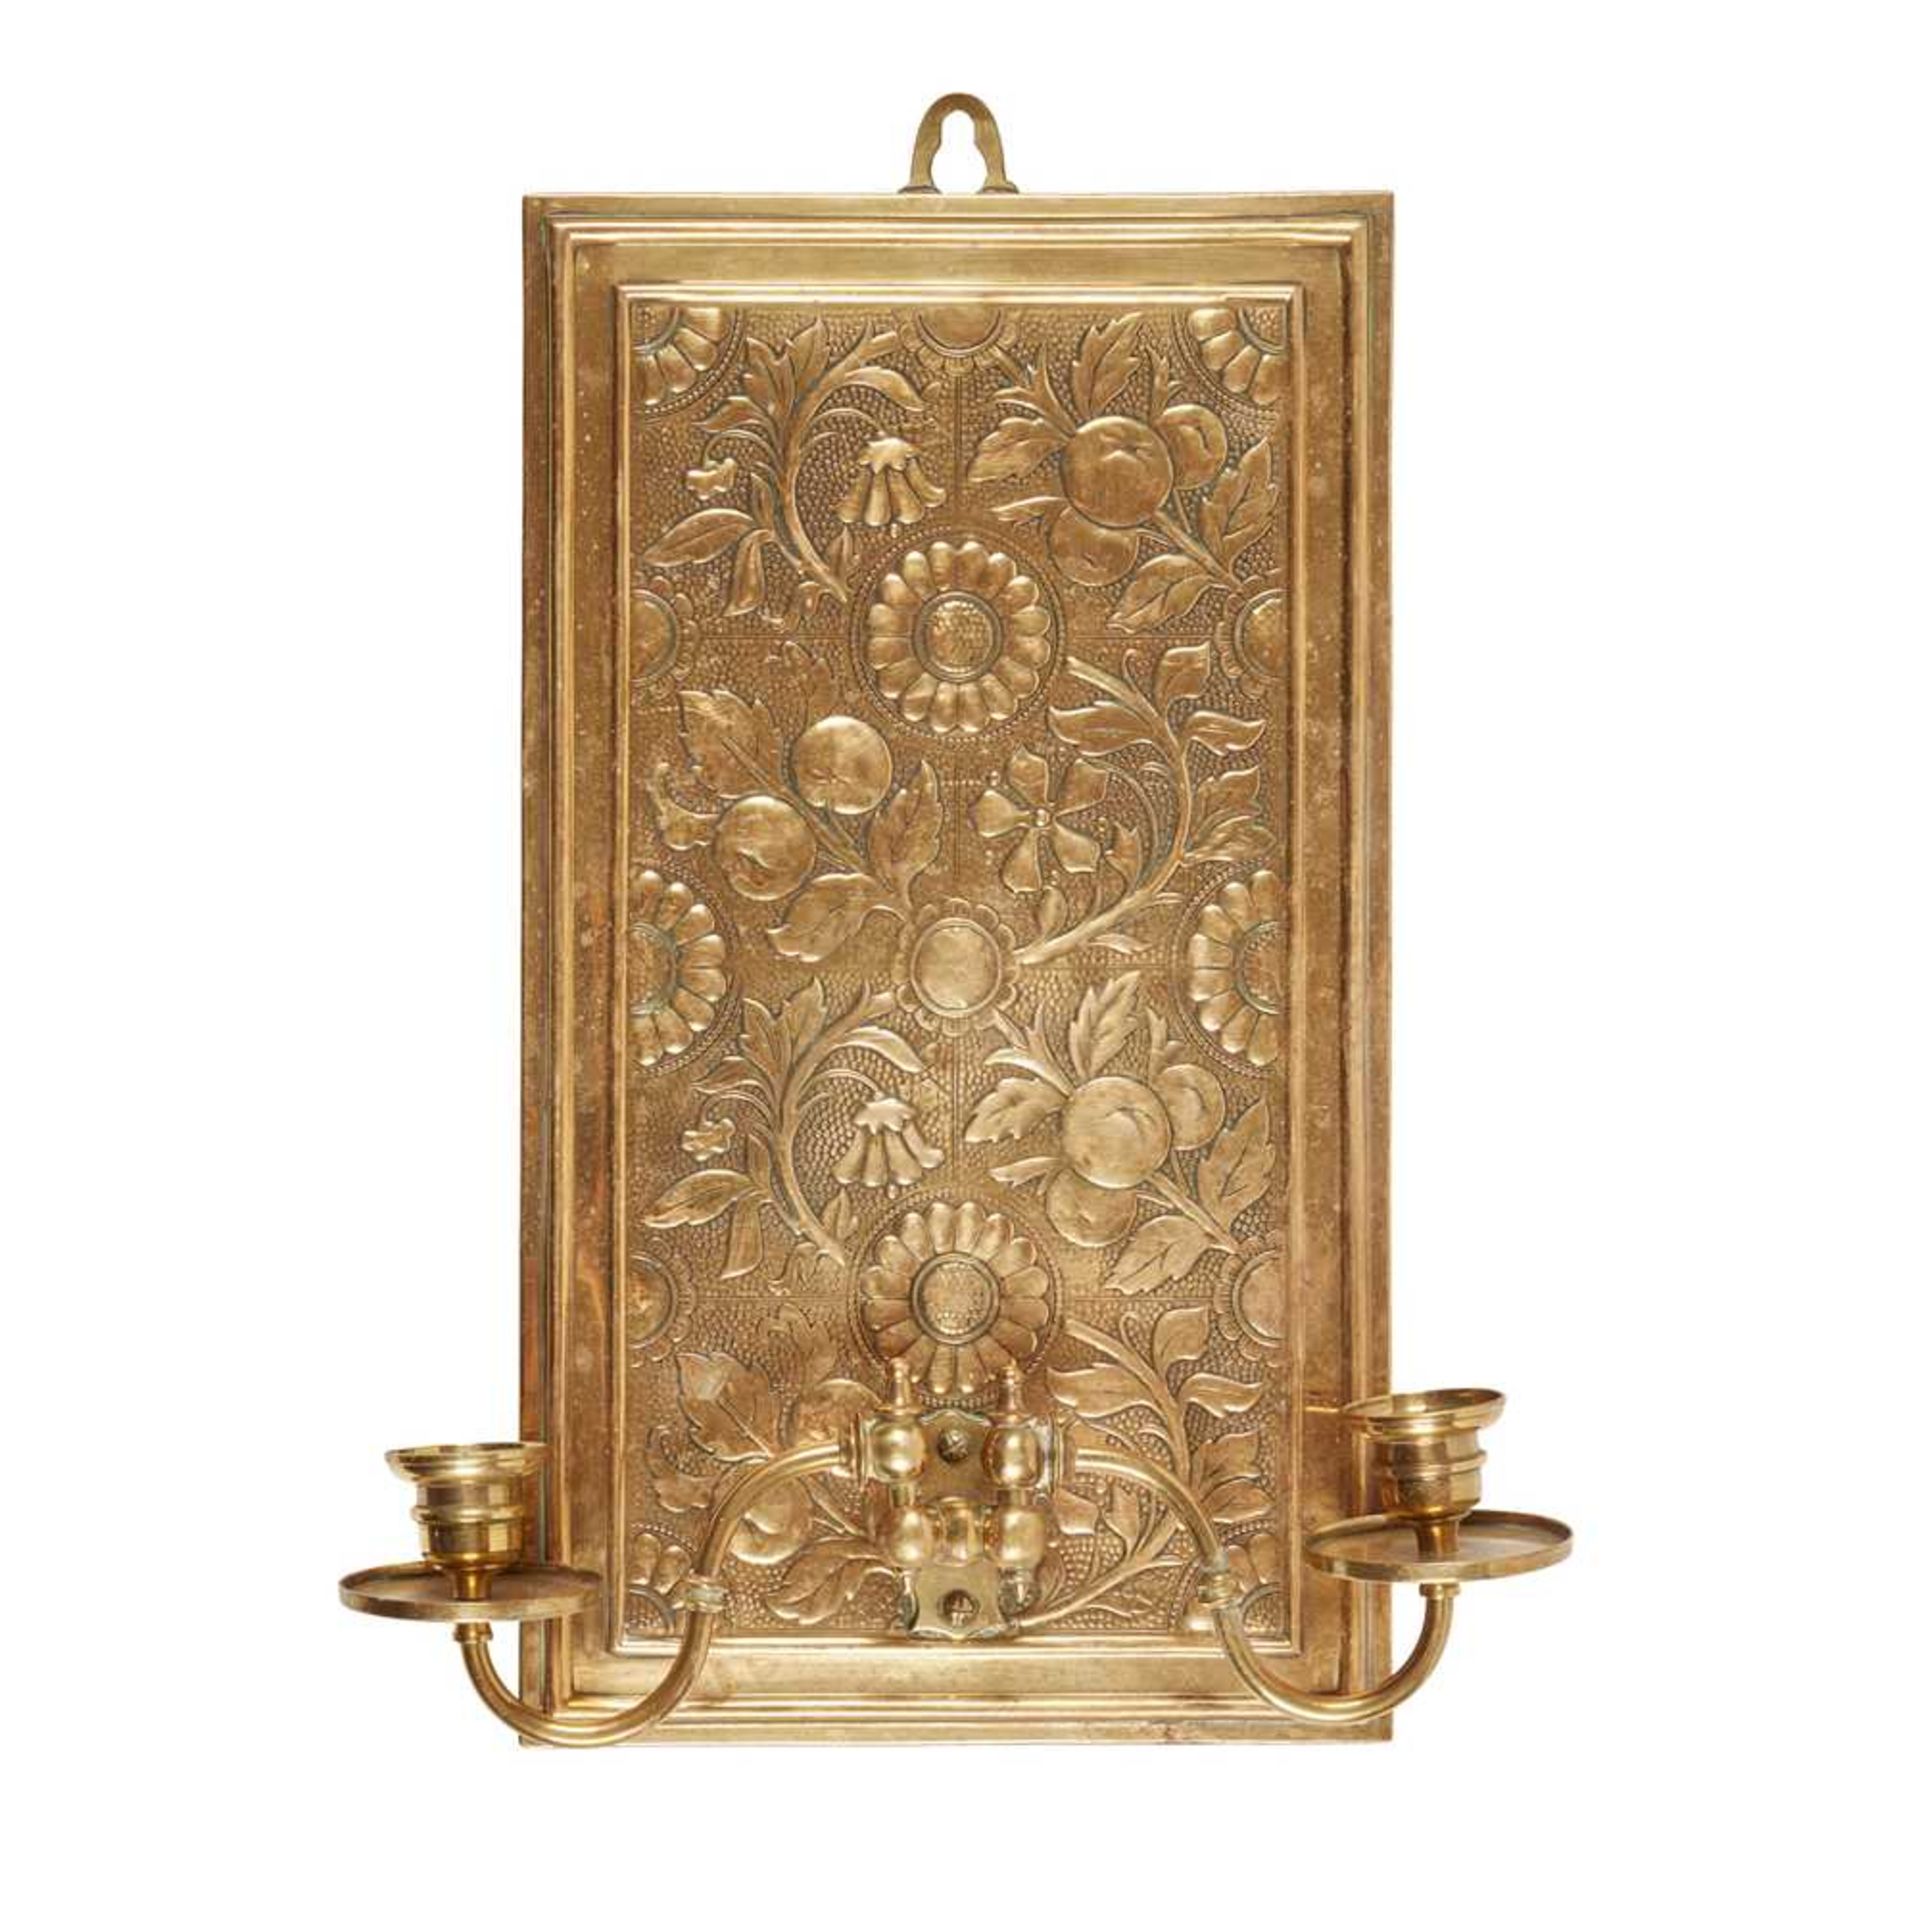 MANNER OF BRUCE TALBERT PAIR OF AESTHETIC MOVEMENT WALL SCONCES, CIRCA 1876 - Image 2 of 3